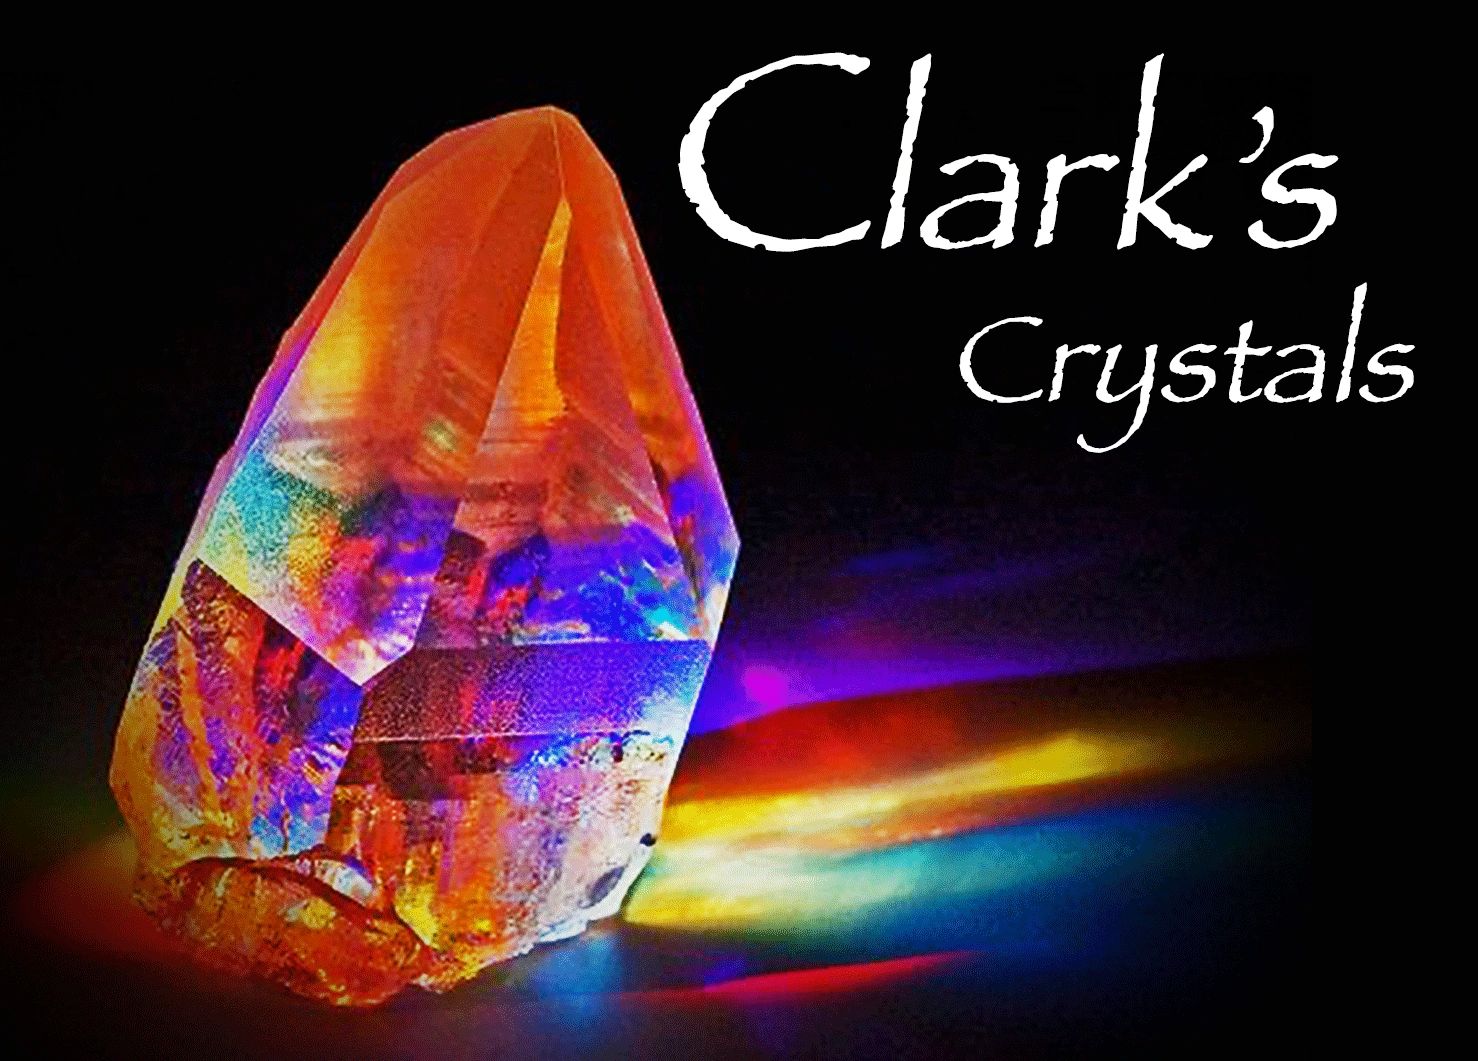 About Clarks Crystals 